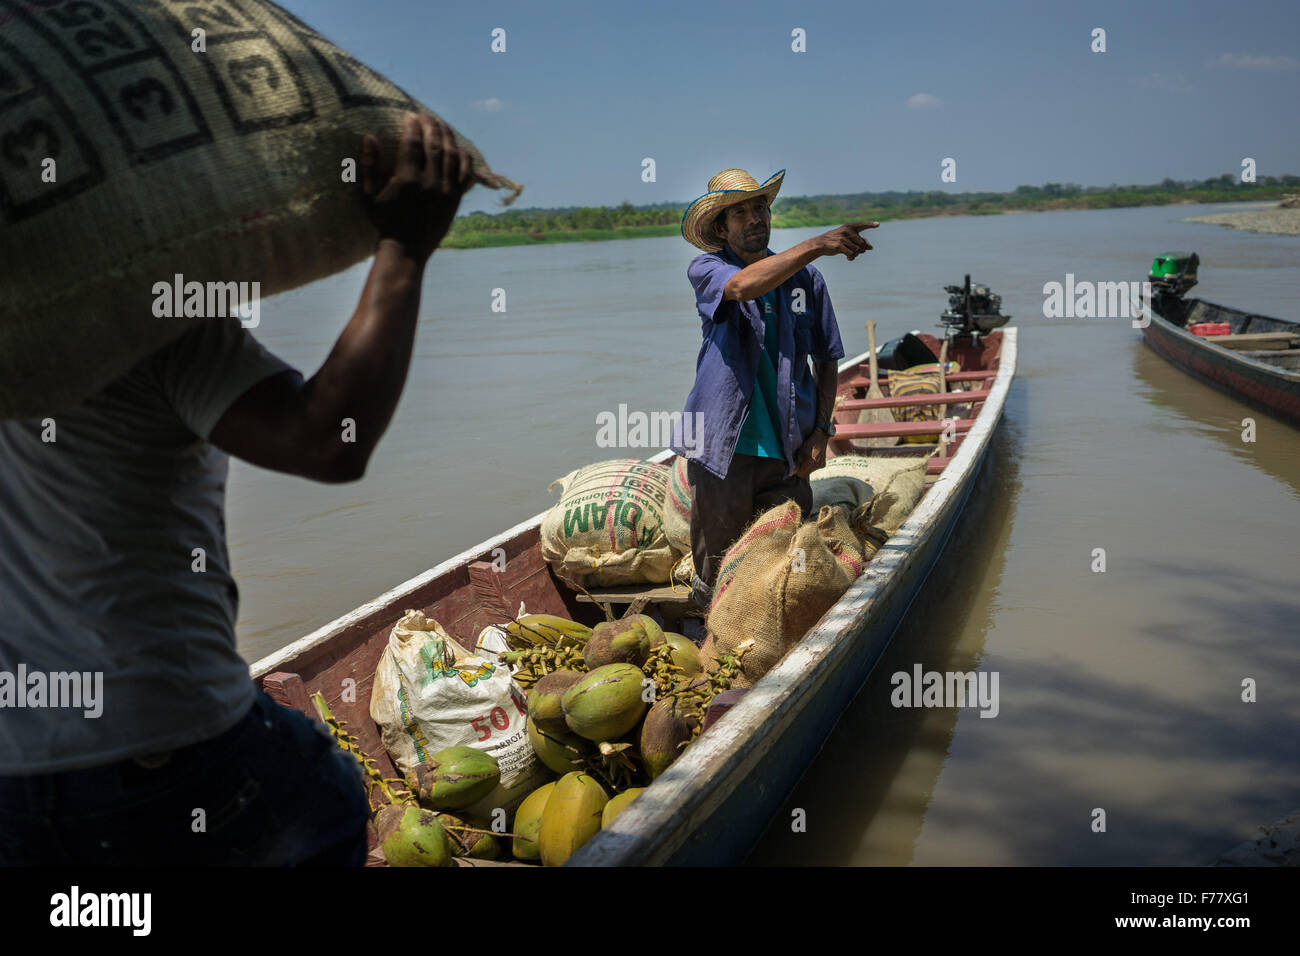 Farmer load processed and fermented cocoa beans onto a long boat for delivery to their collective collection point run by Chocolate Colombia February 23, 2015 in Corregimiento Guarumo, Colombia. Cocoa pods are dried and fermented becoming the basis of chocolate. Stock Photo